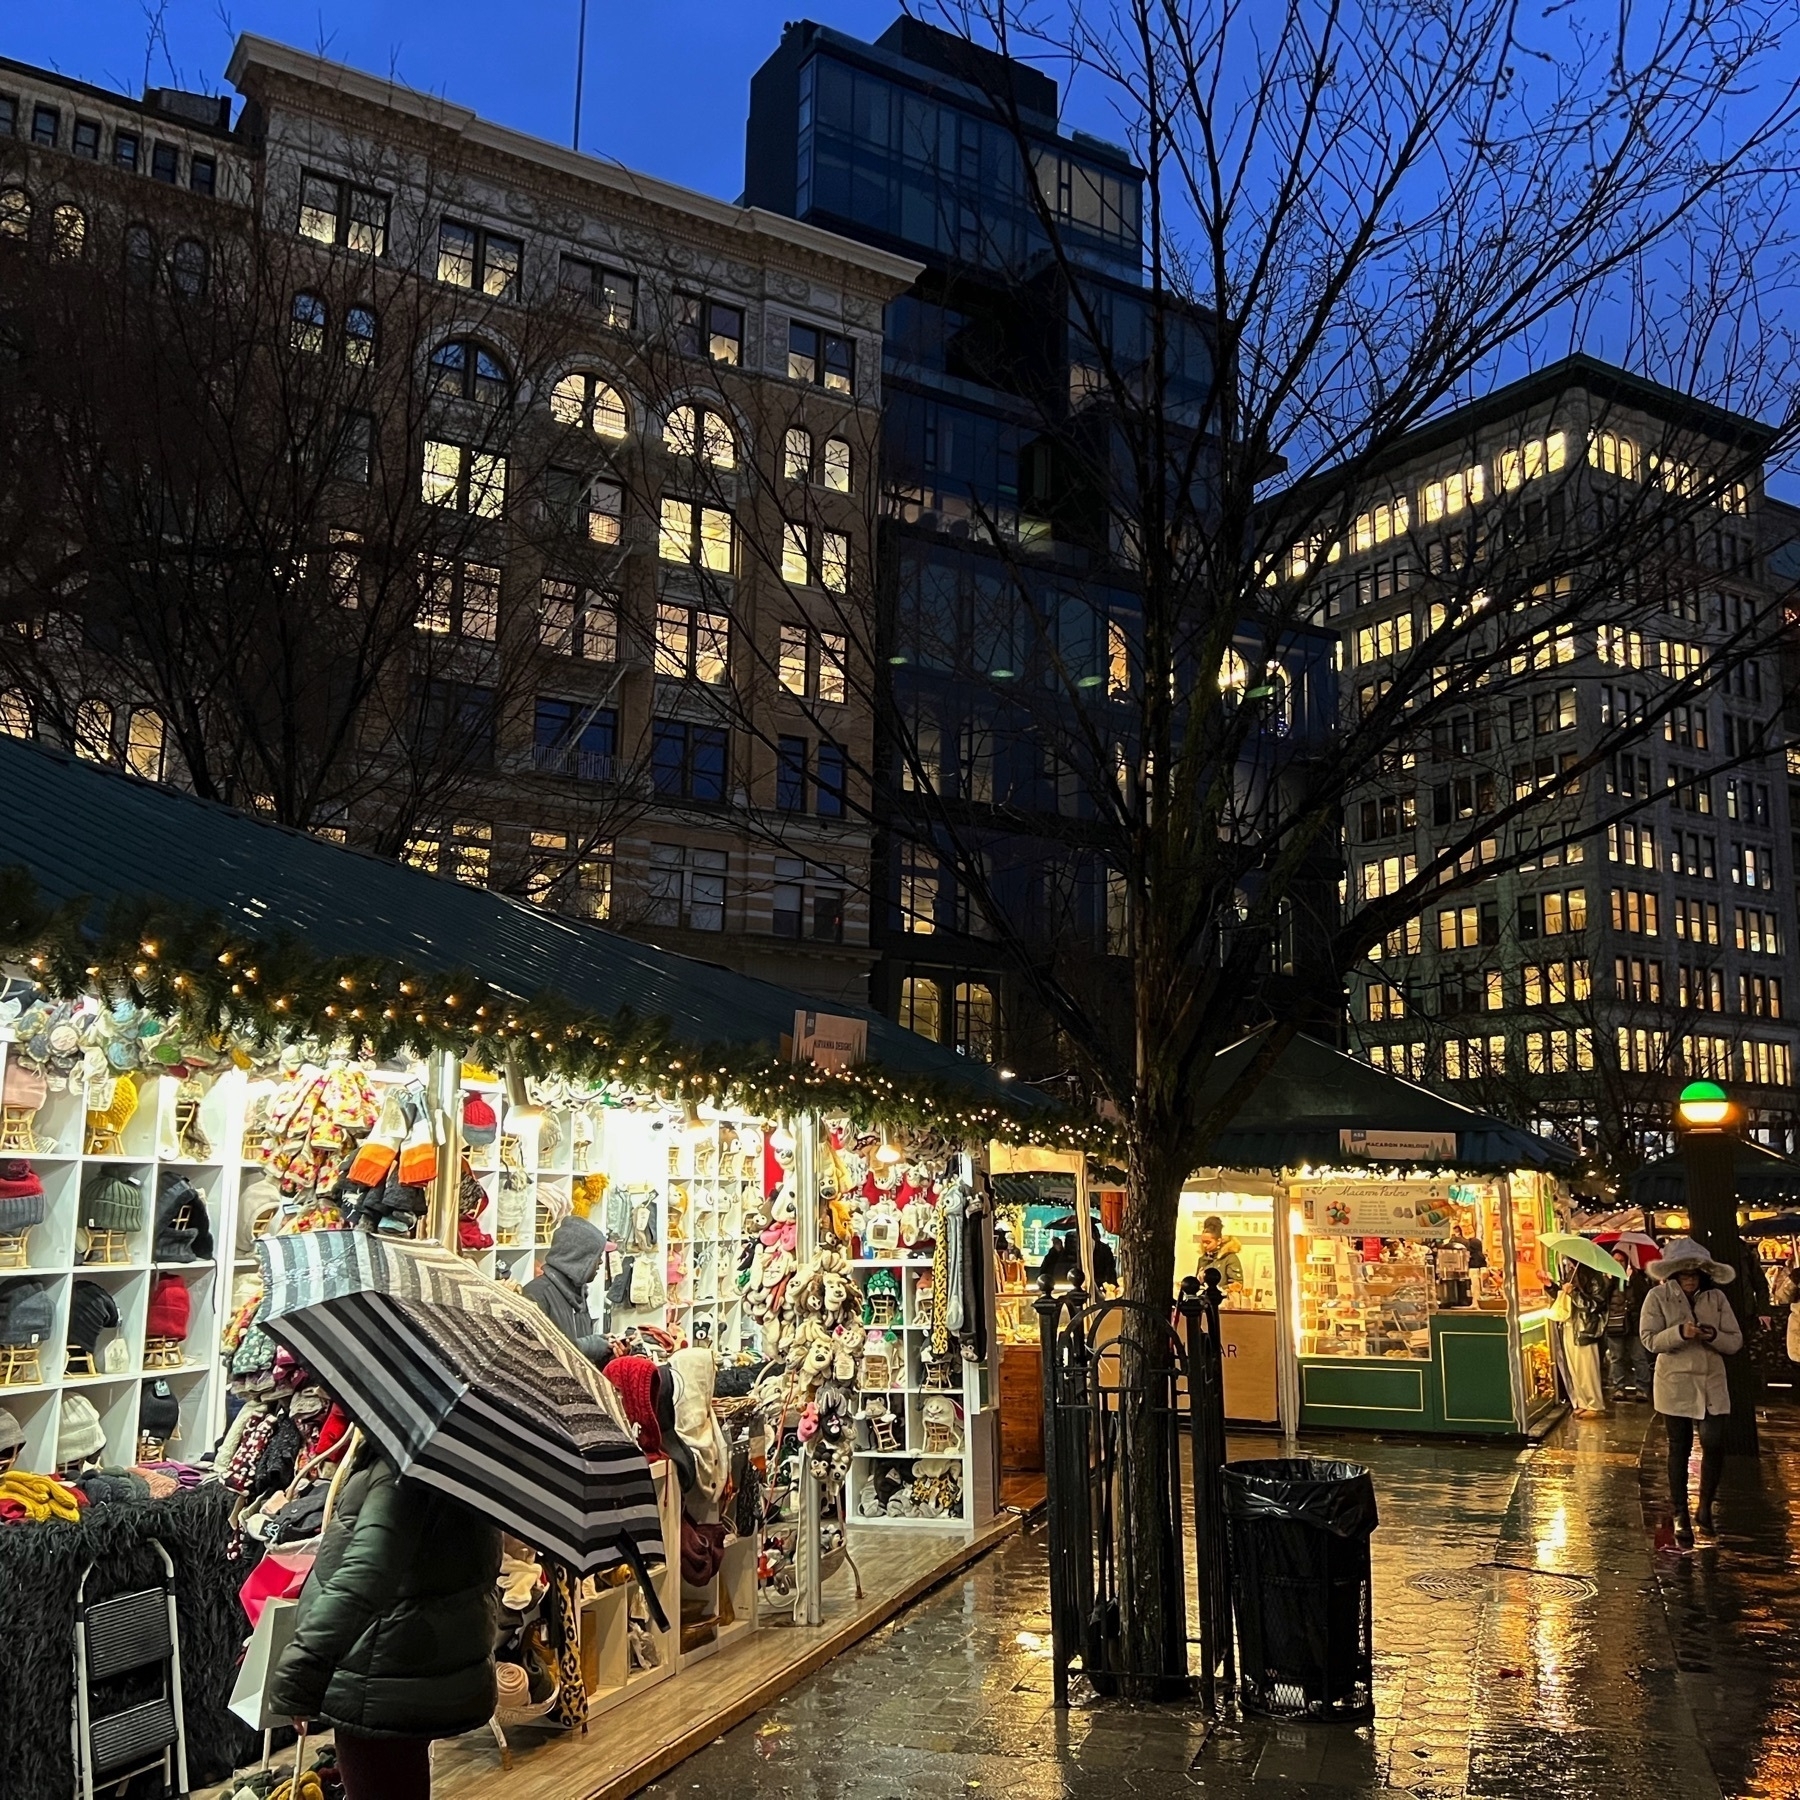 Temporary holiday market stands constructed in Union Square Park with a backdrop of buildings surrounding the park.